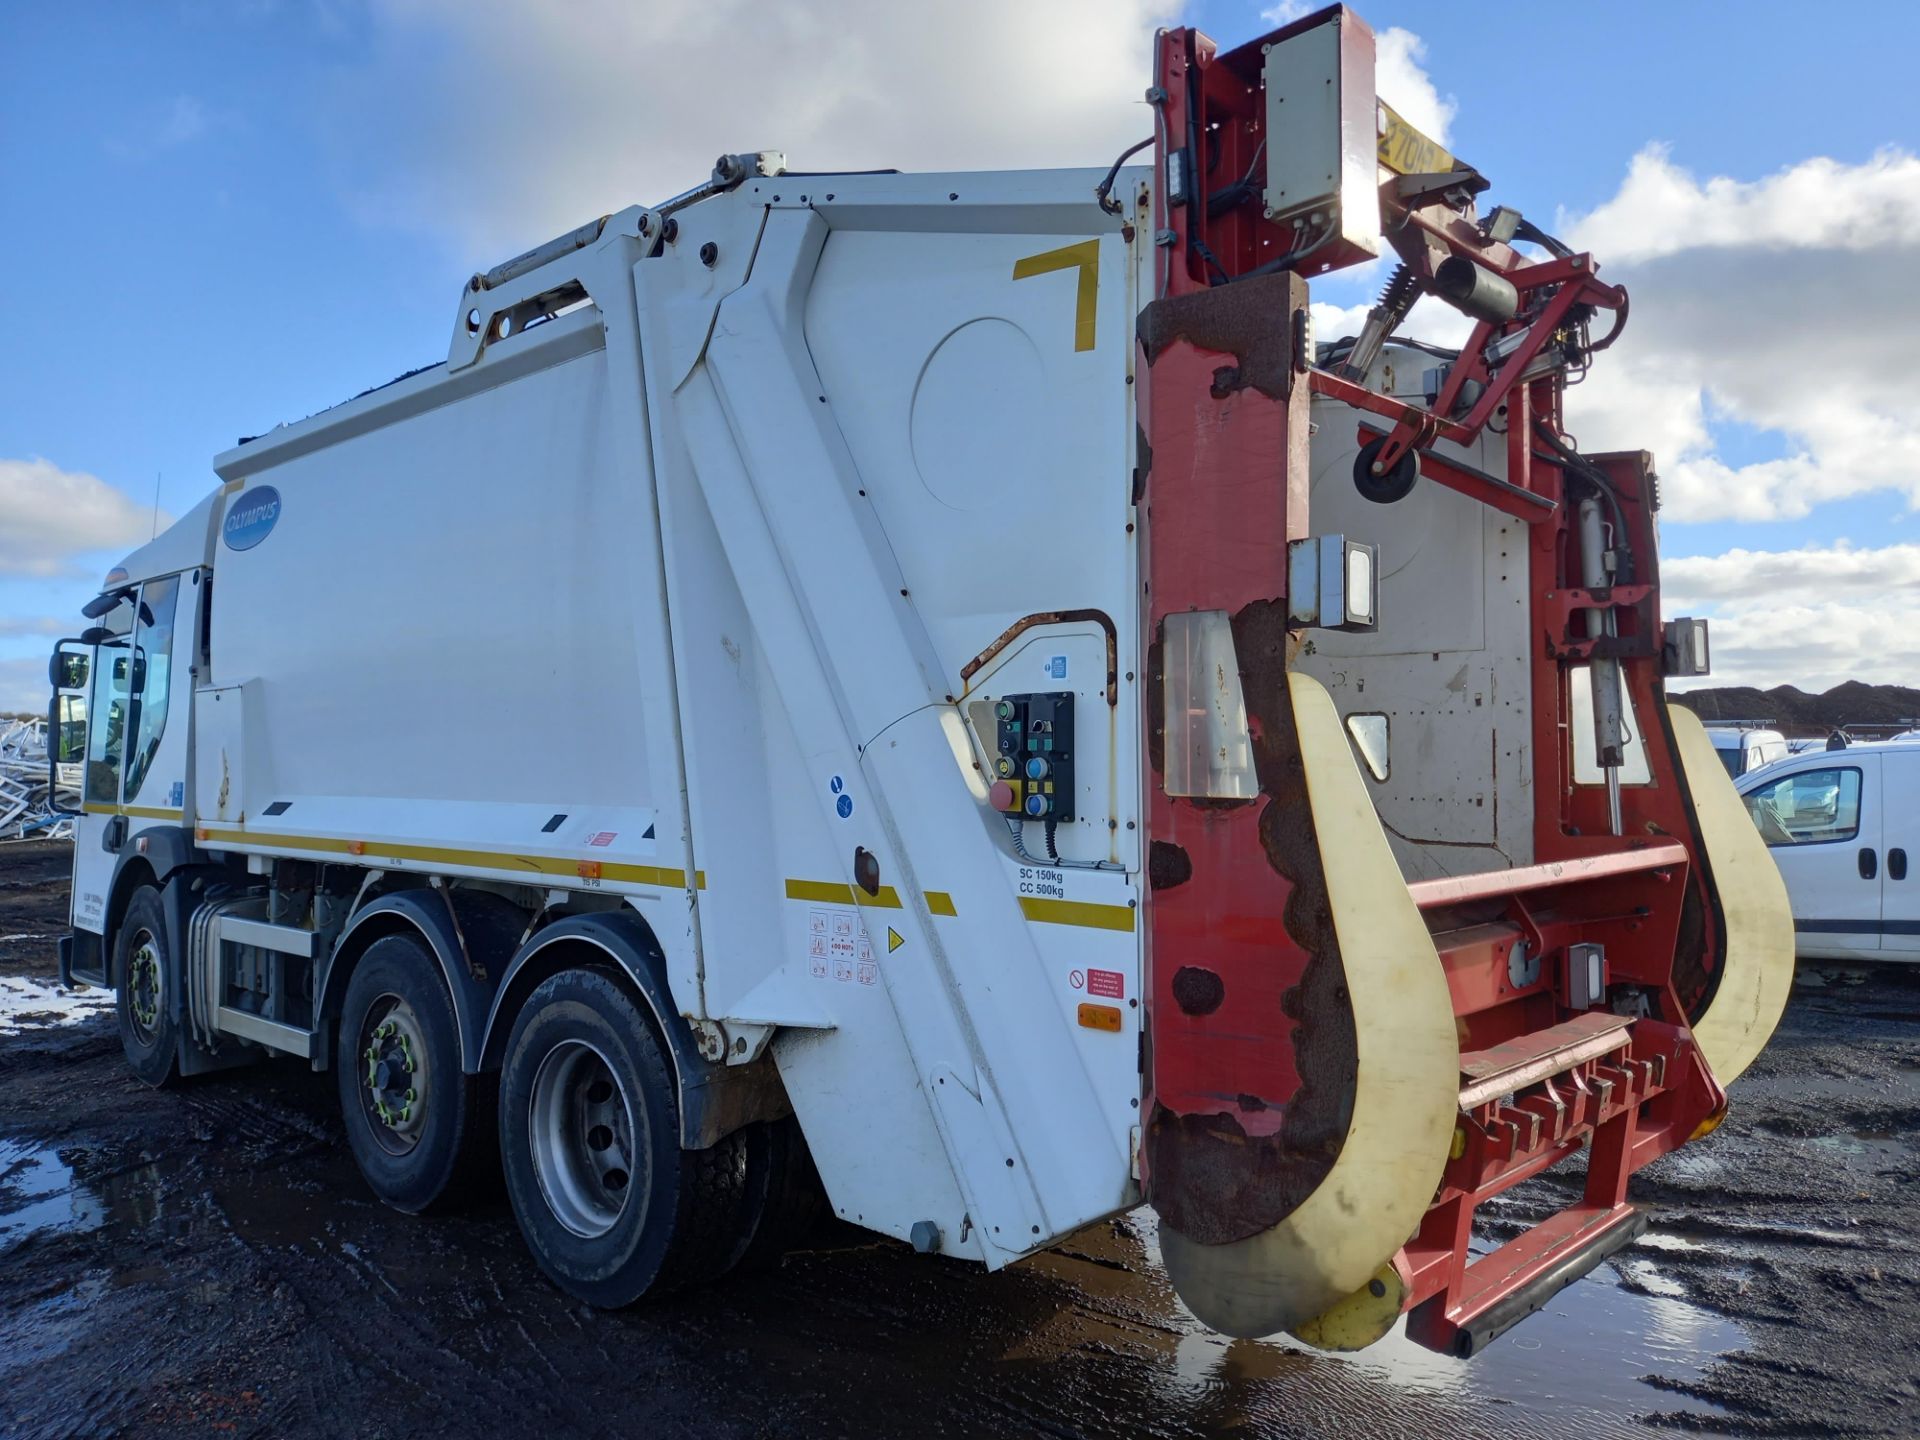 2015 Dennis Elite 6 Refuse Collection Vehicle - Image 5 of 13